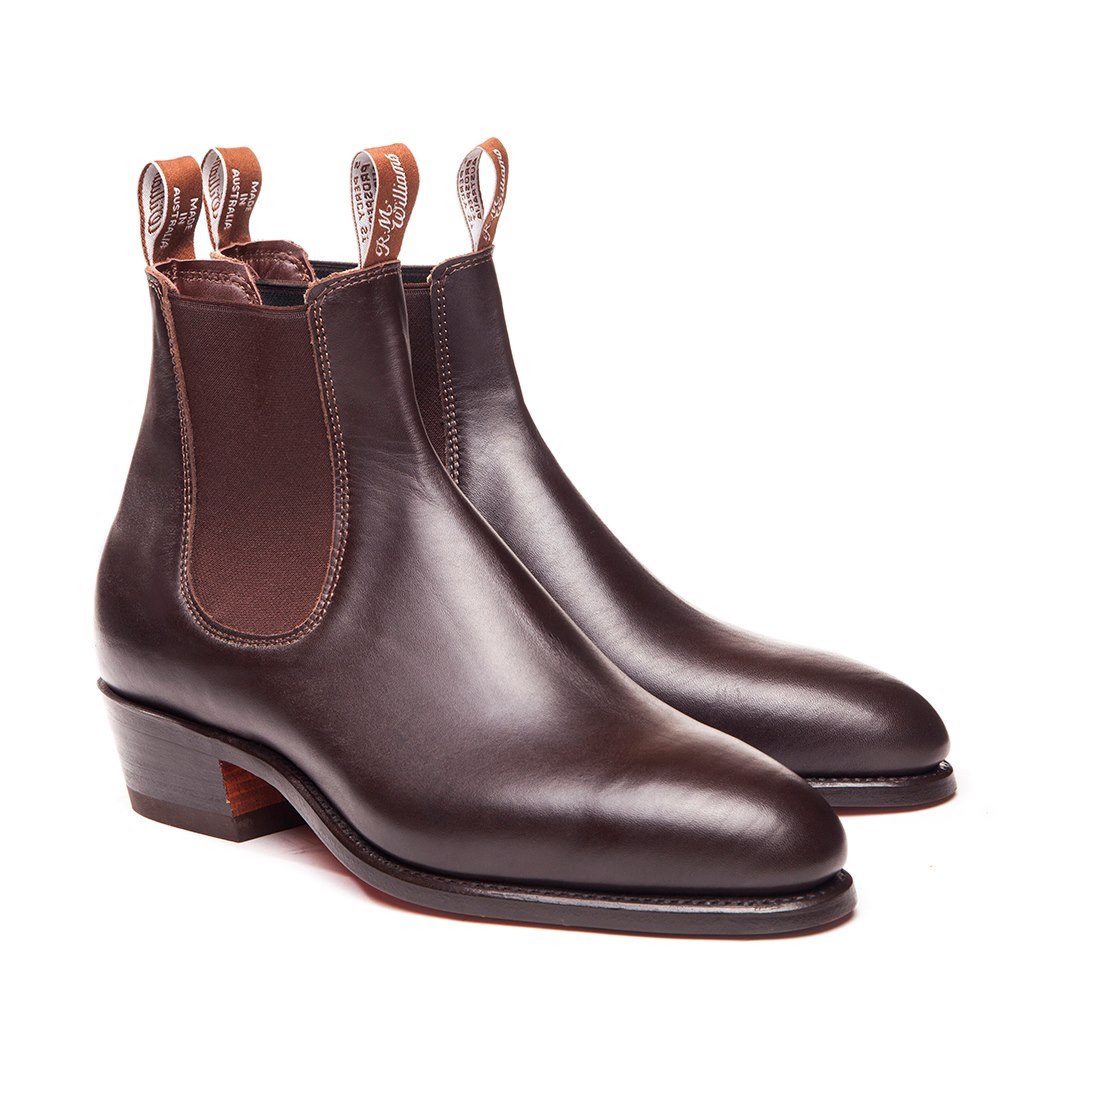 RM Williams Boots | Arno Bay Boot B522Y | Port Phillip Shop